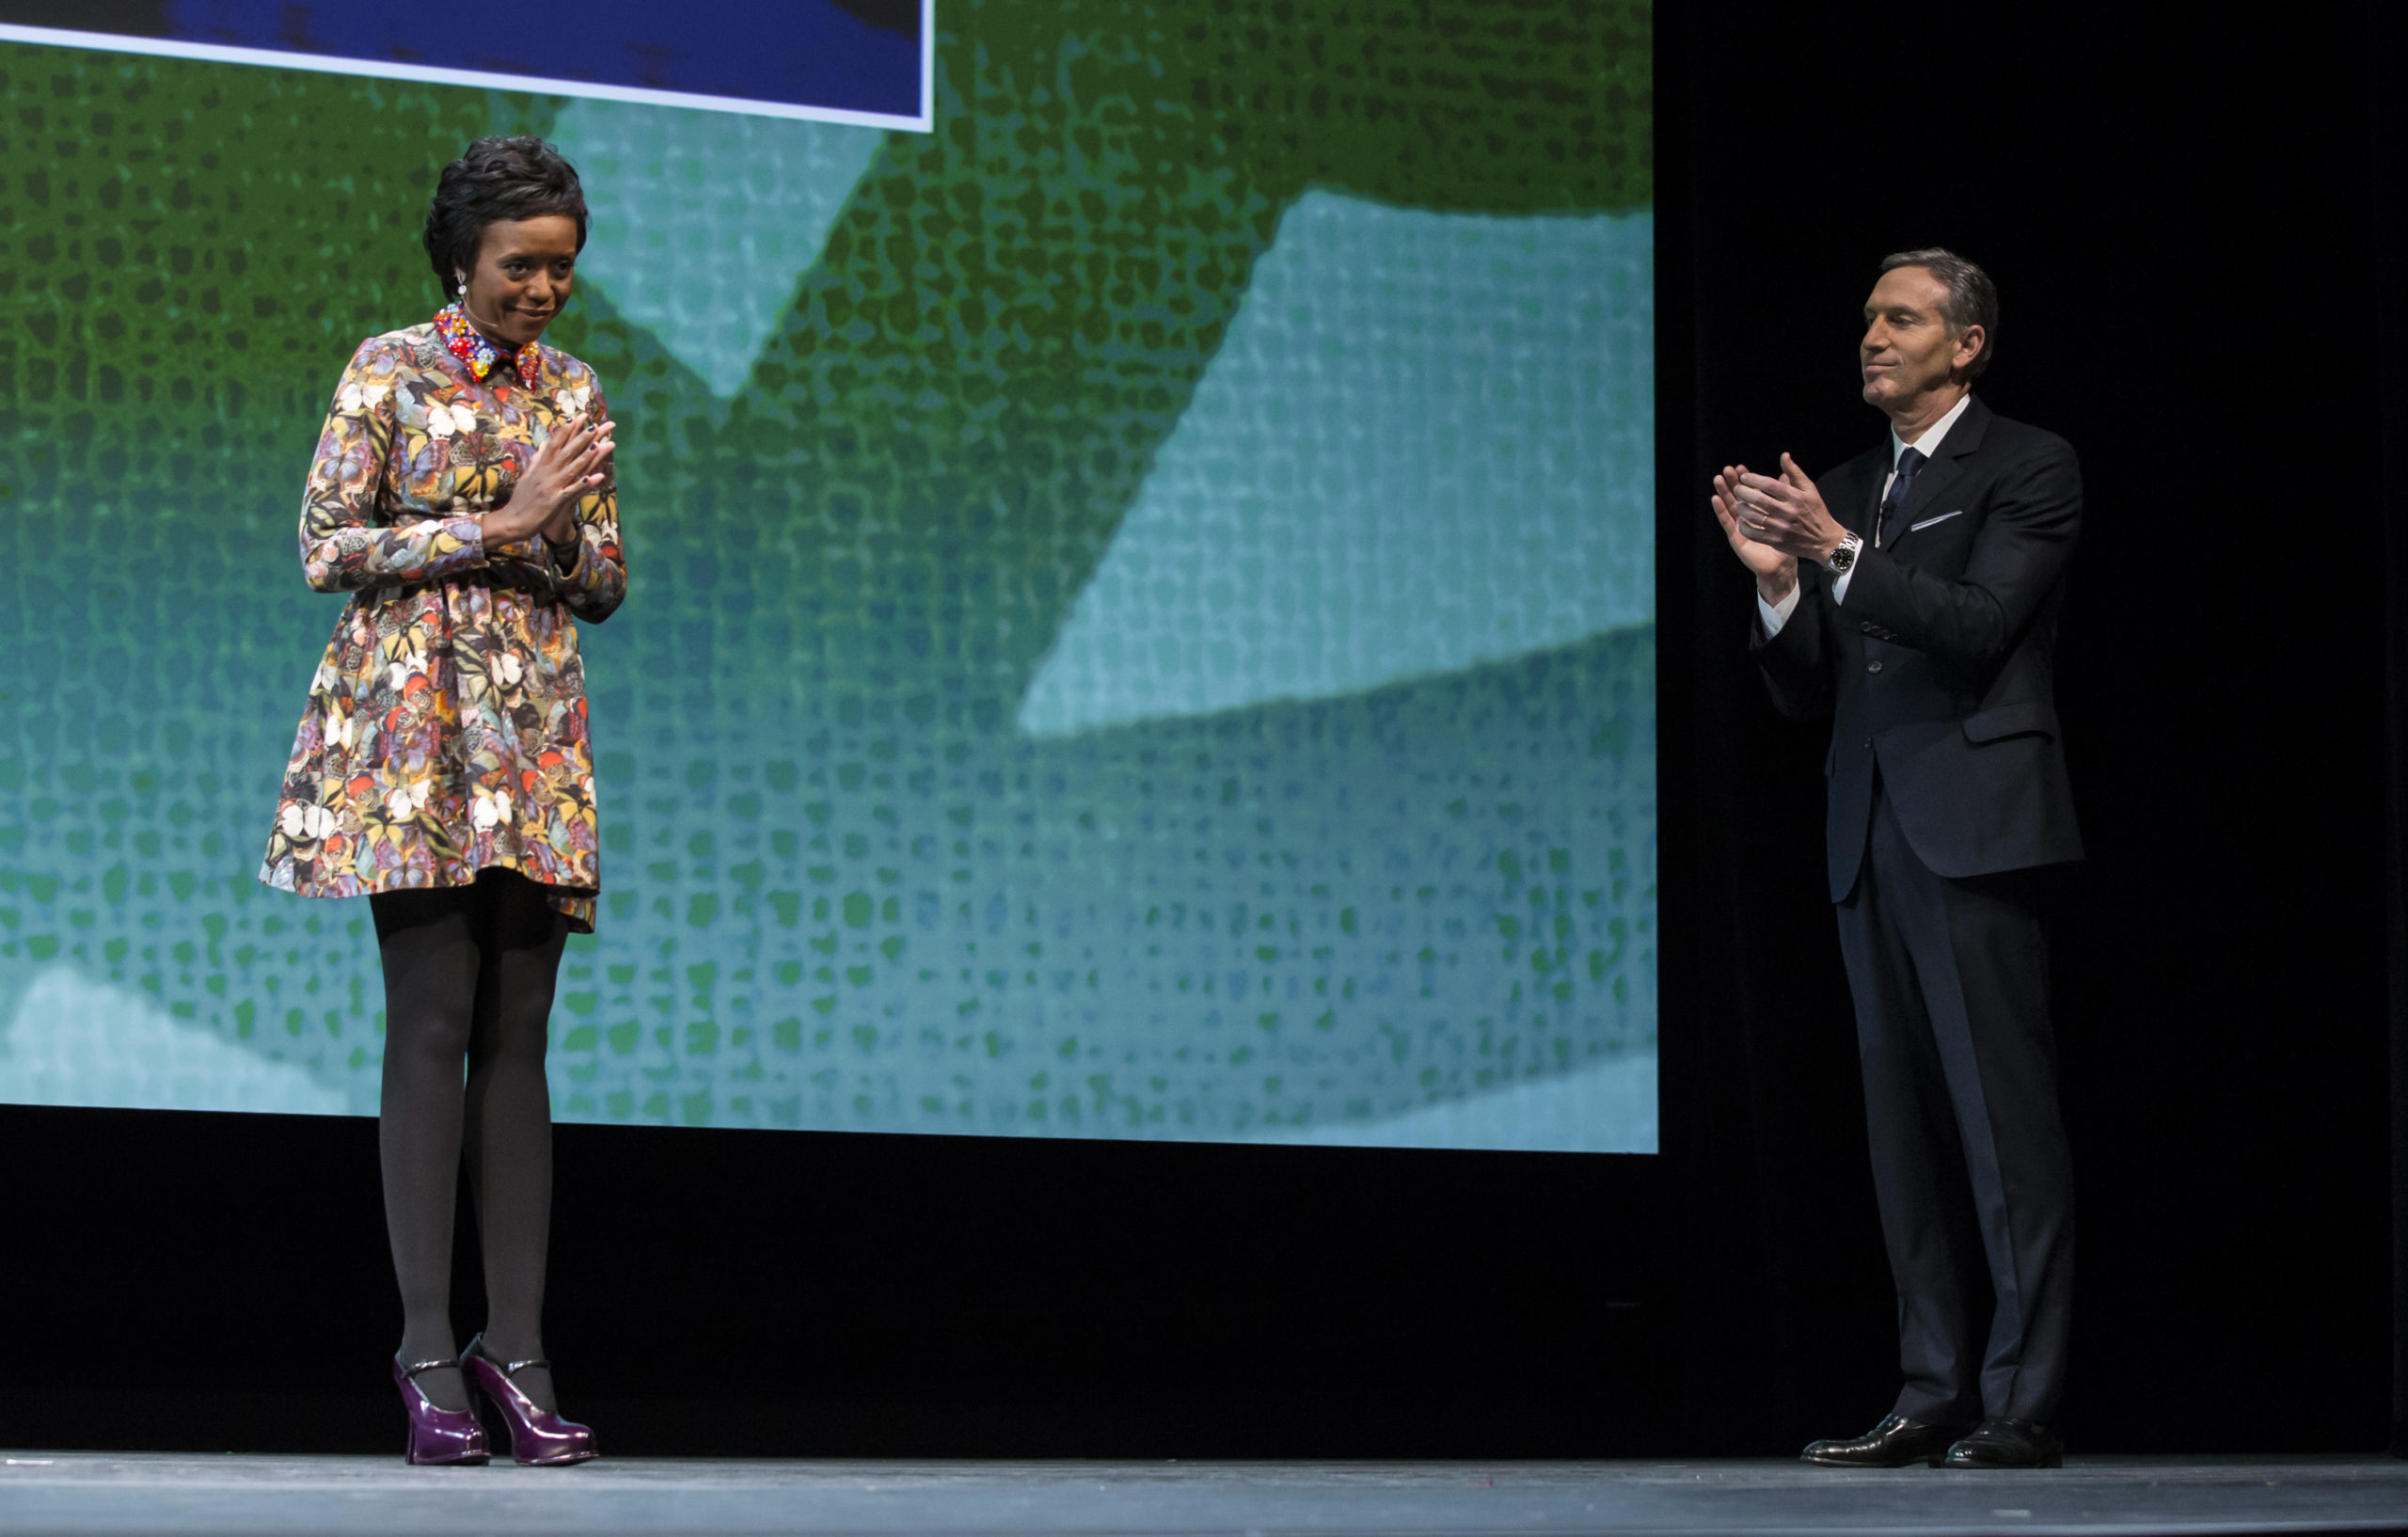 Starbucks board member Melody Hobson bows while former CEO Howard Schultz applauds at the Starbucks annual shareholders meeting on March 18, 2015 in Seattle, Washington. (Stephen Brashear/Getty Images)